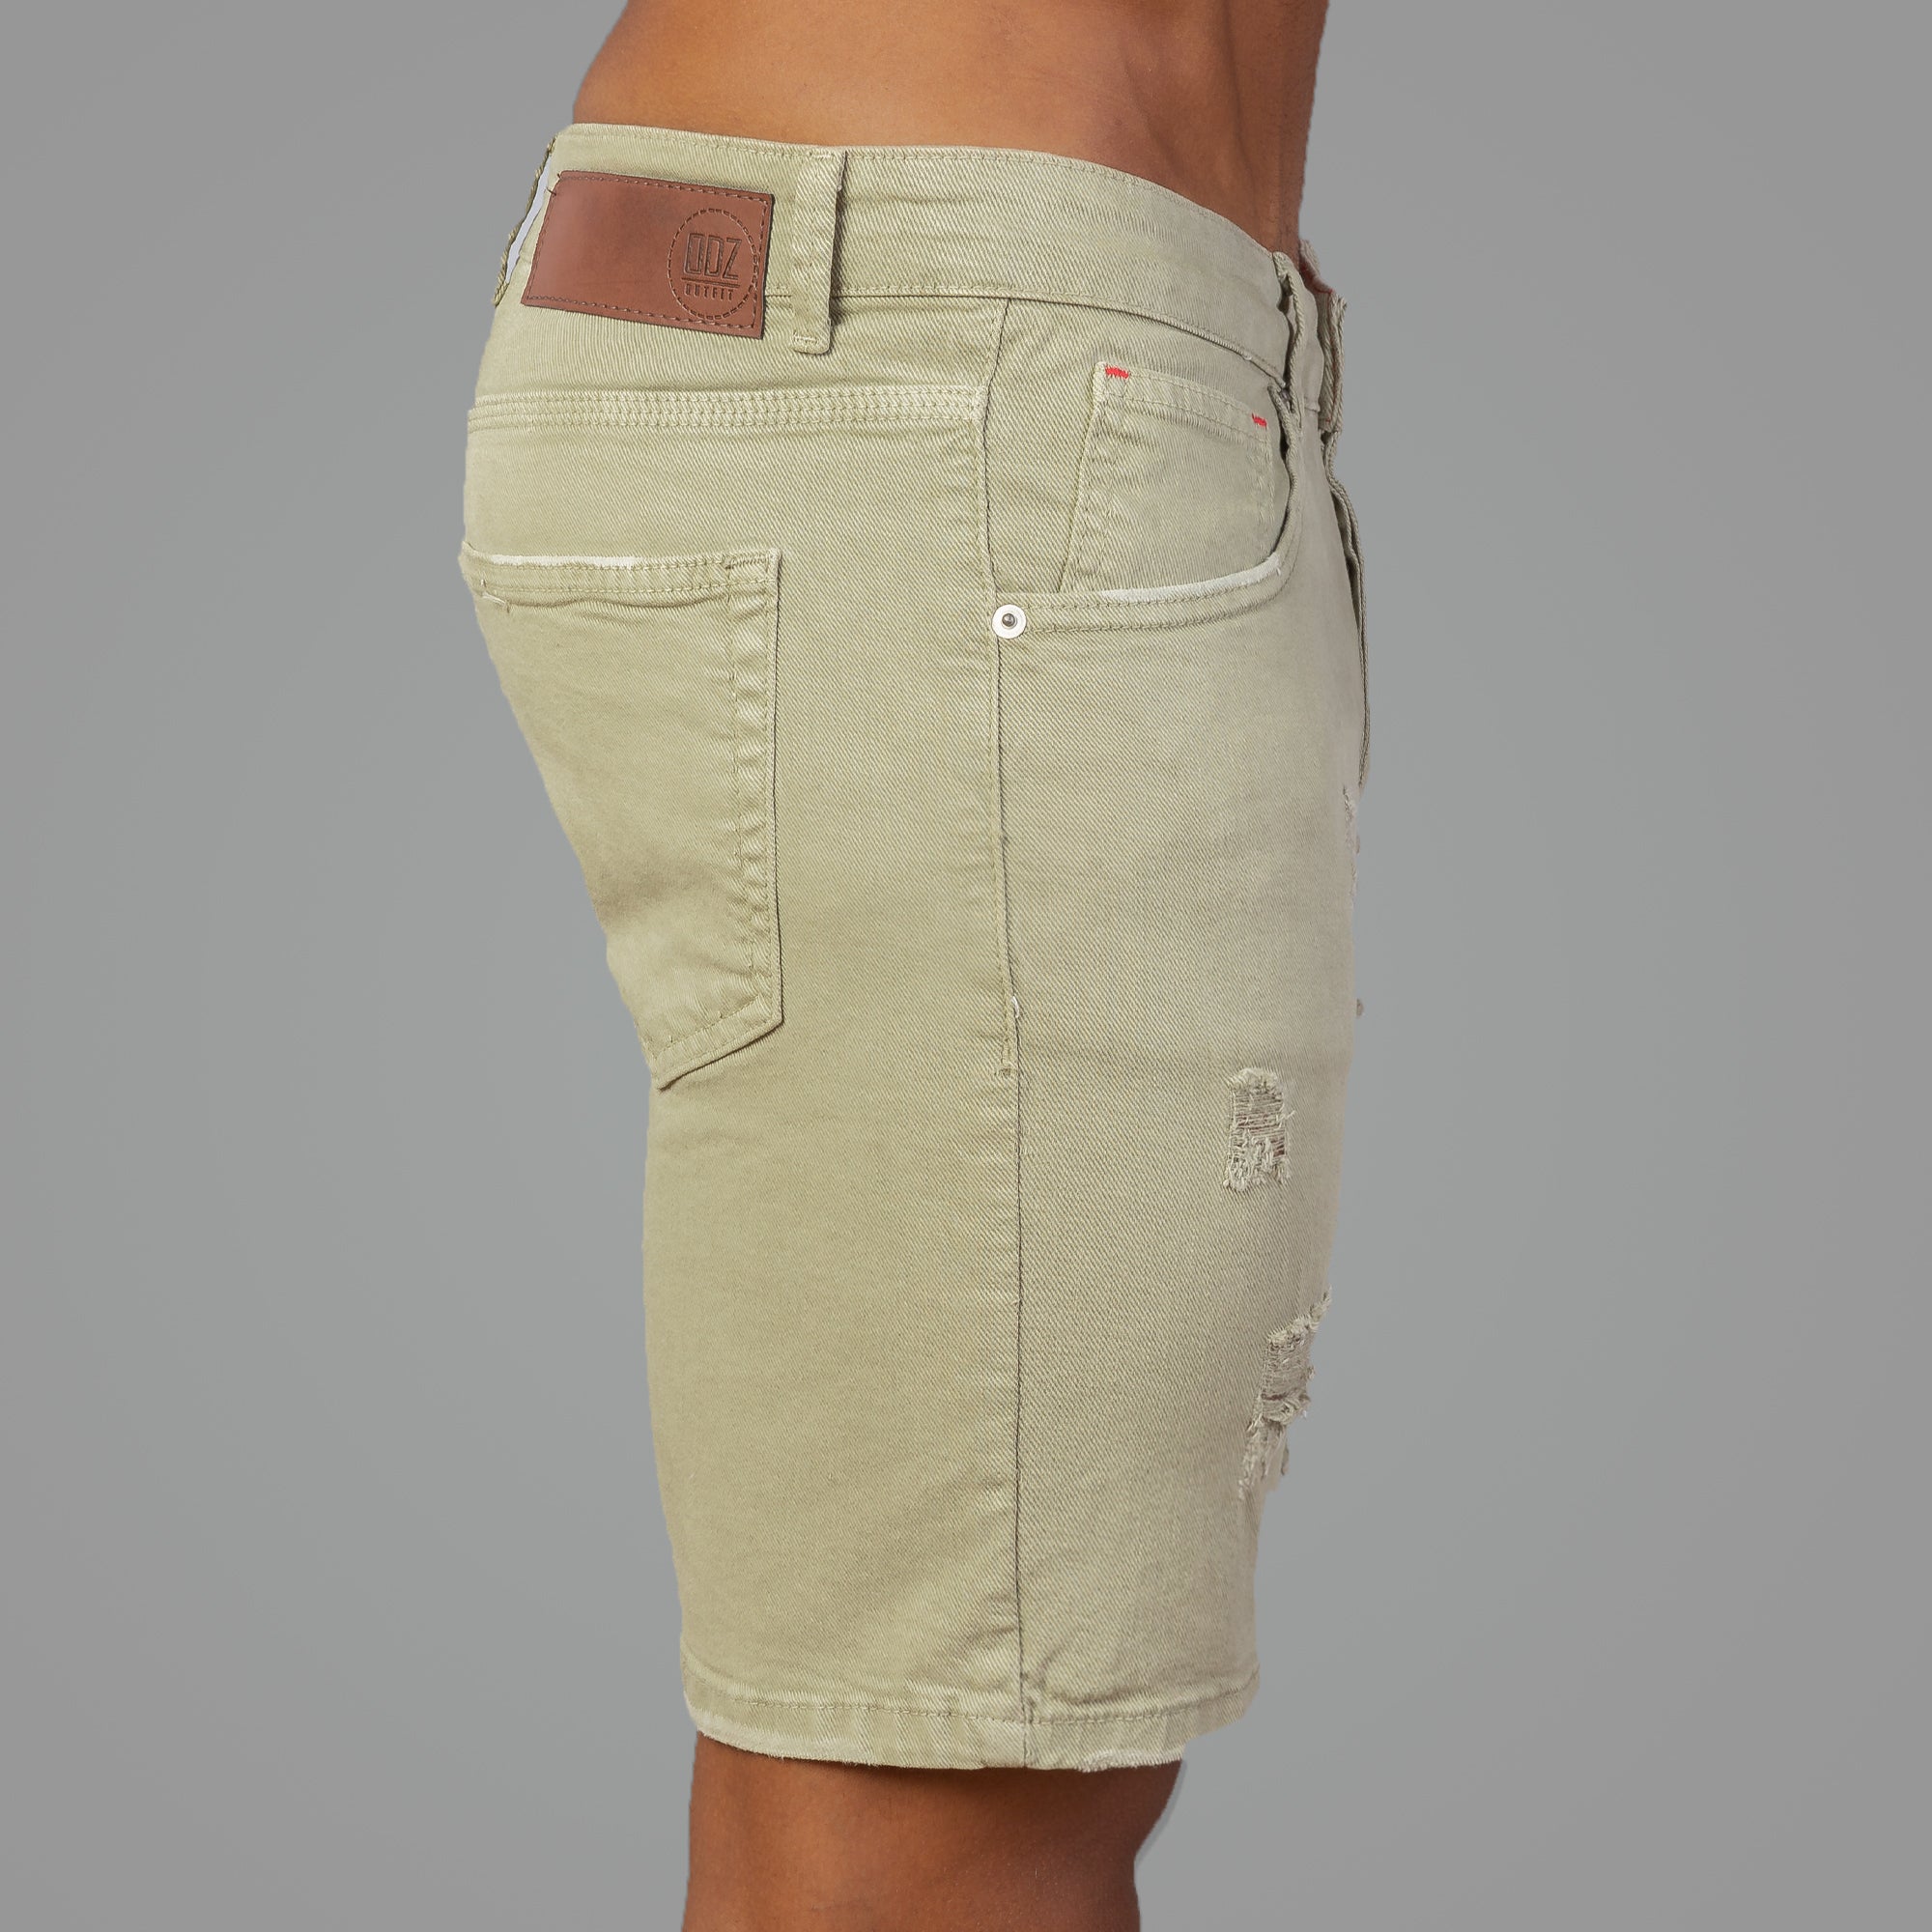 Olive Jeans Shorts